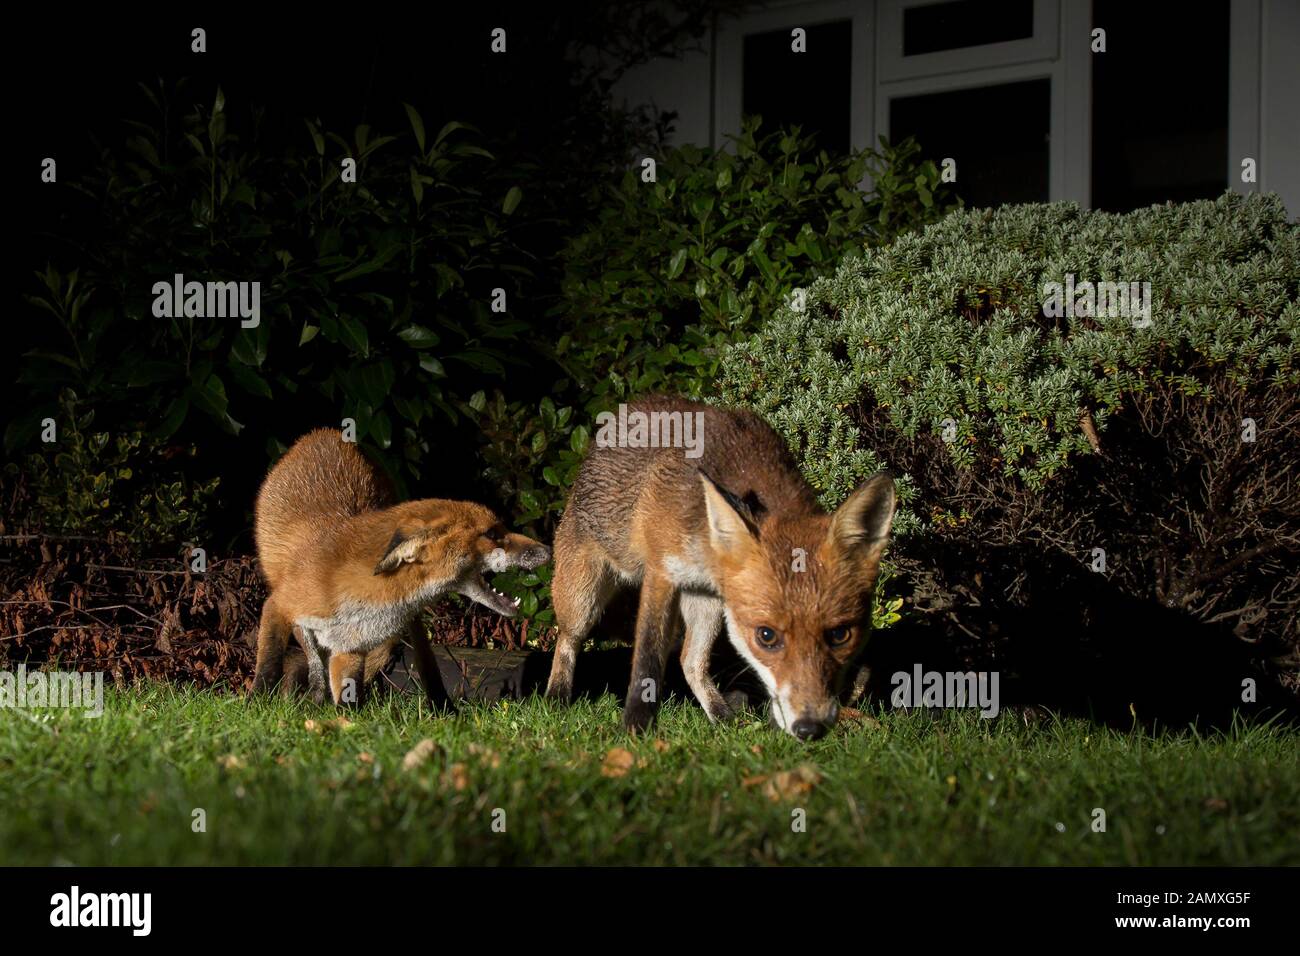 Close up front view of wild hungry urban UK red foxes (Vulpes vulpes) isolated in the dark, foraging for food in UK garden at night, lit by spotlight. Stock Photo